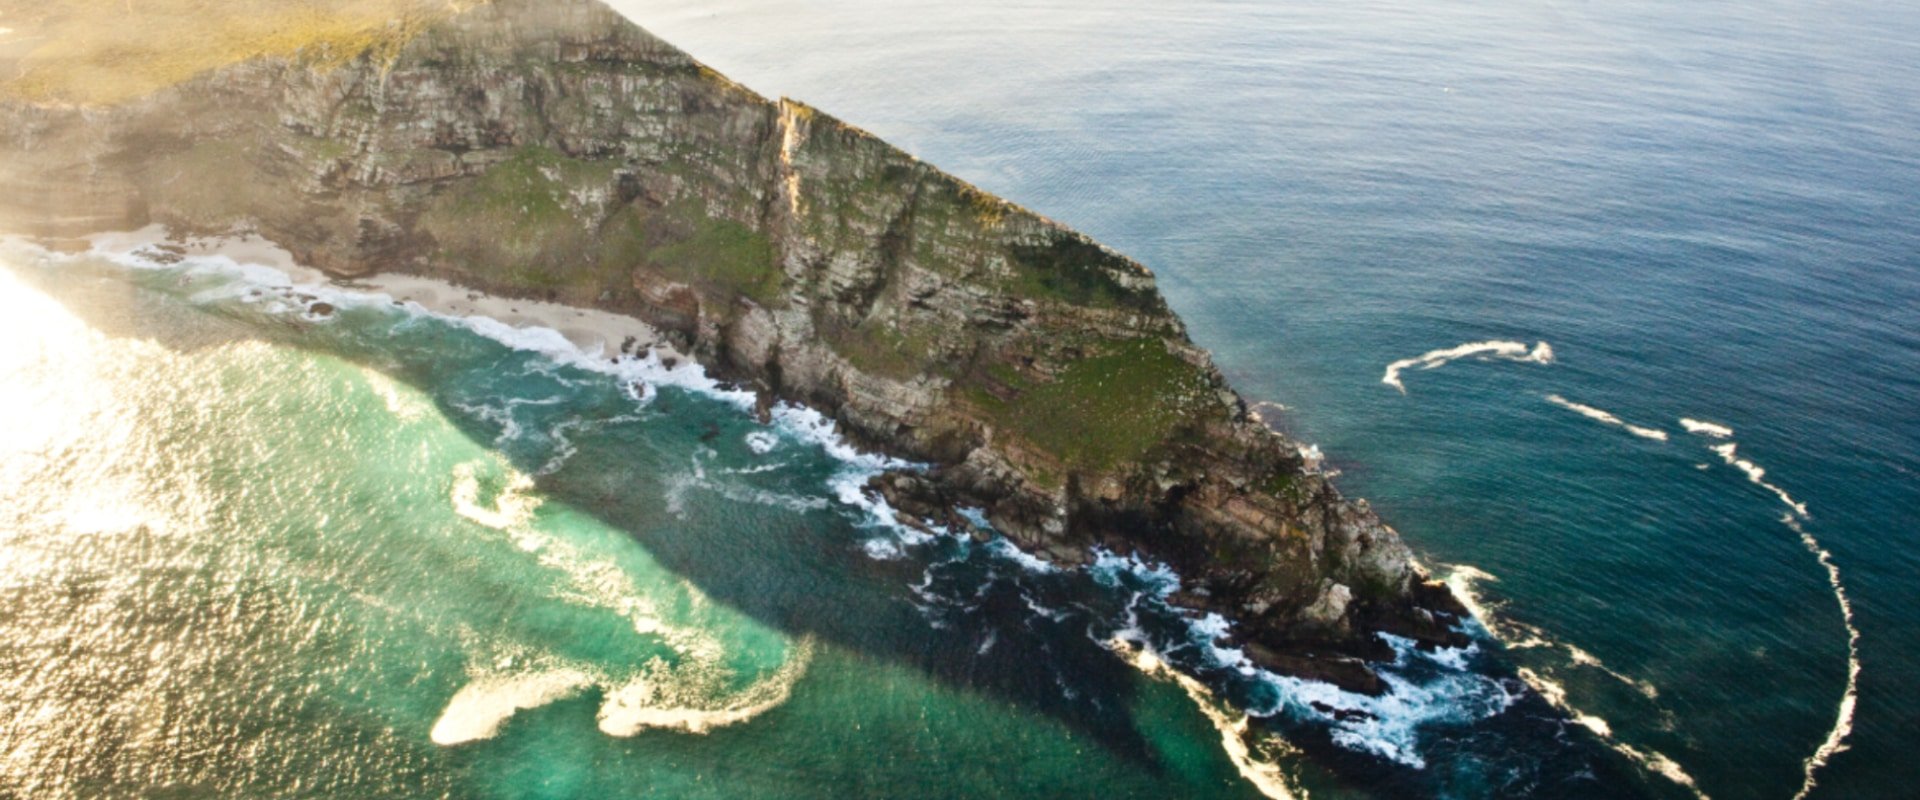 Absorb the striking Atlantic seaboard views on a Cape Point Tour